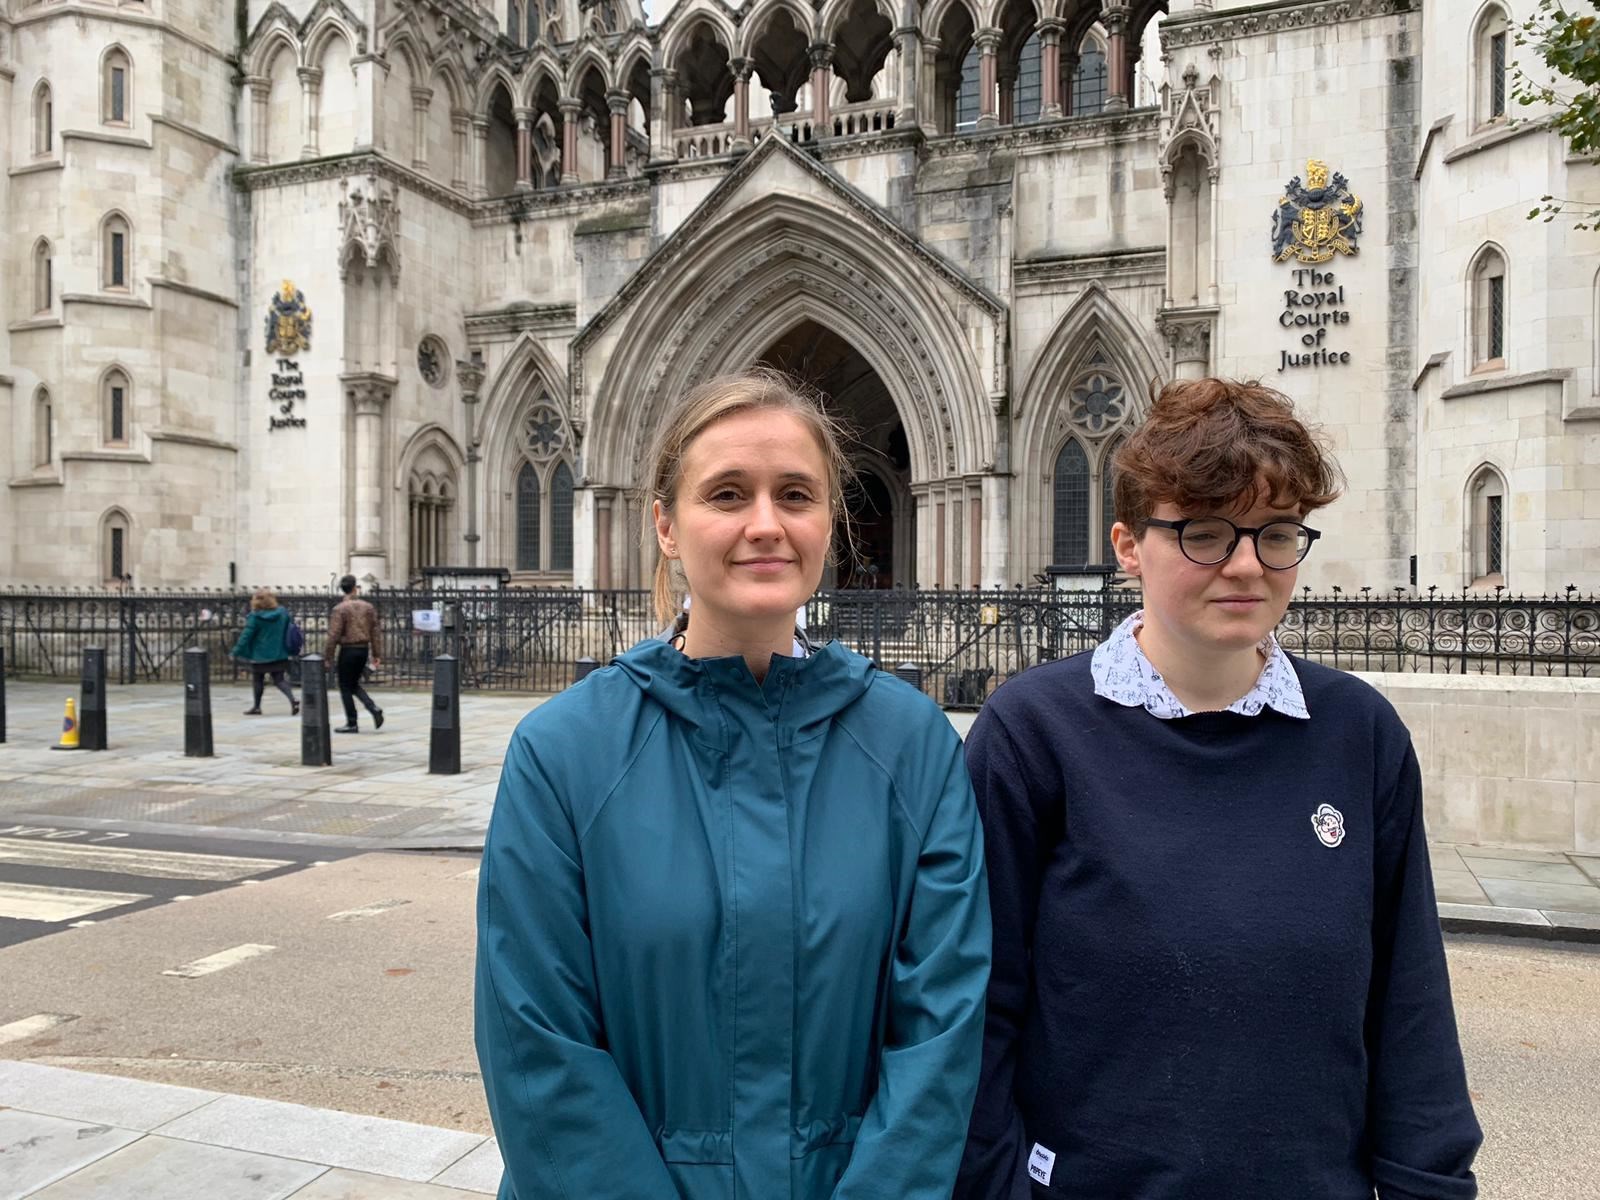 Leigh Day solicitor Catriona Rubens, left, and Ben’s sister, Emma Austin-Garrod, who brought the case on his behalf, outside the Royal Courts of Justice in London (Tom Pilgrim/PA)